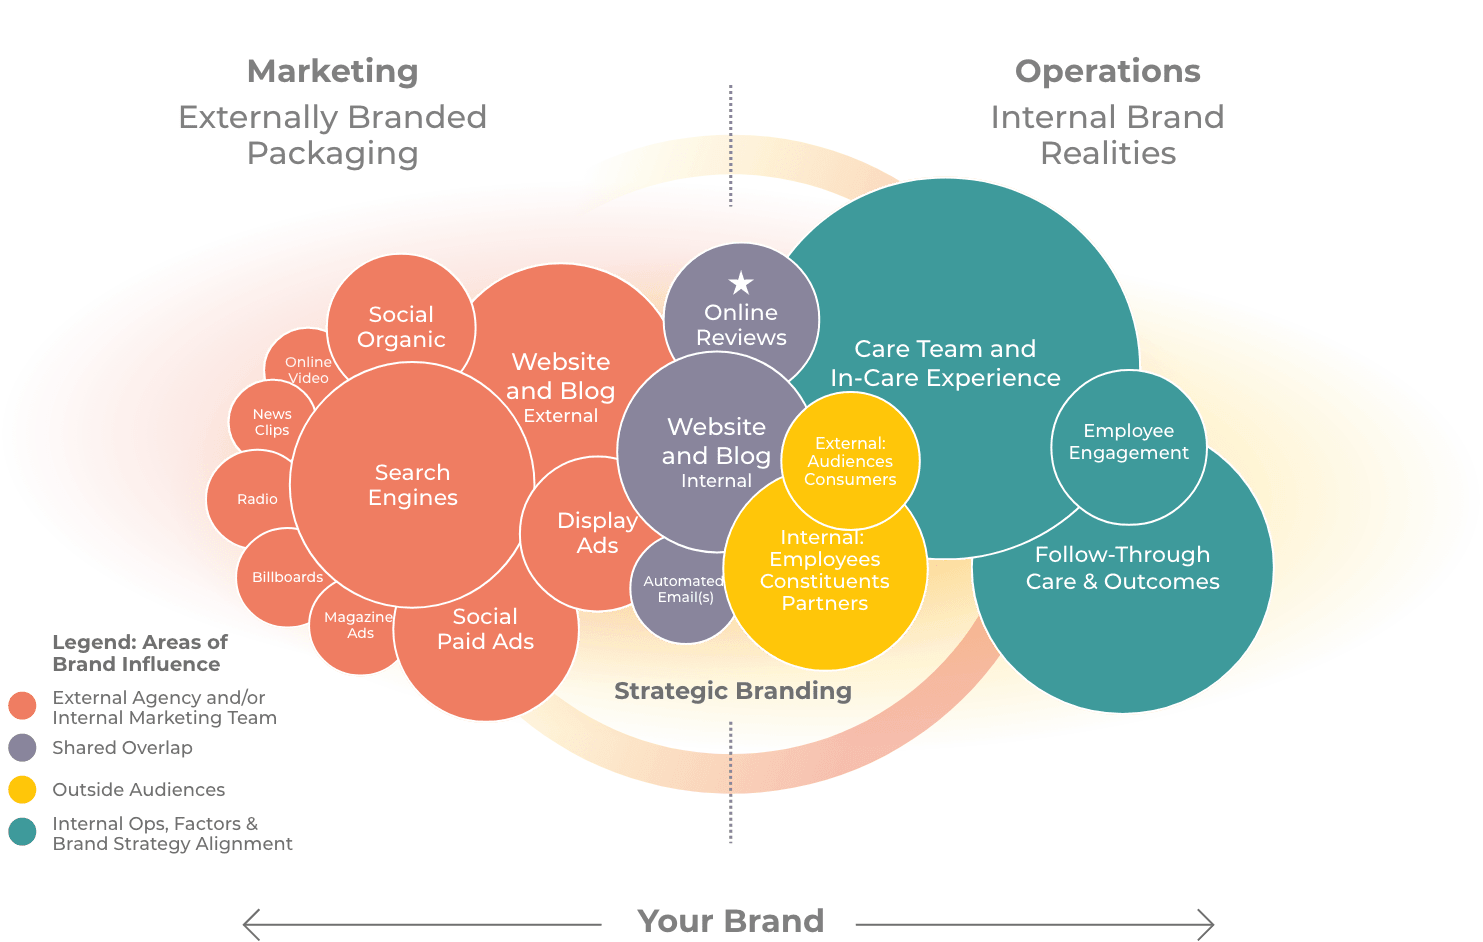 infographic showing the connecting between marketing, brand strategy, and business operations